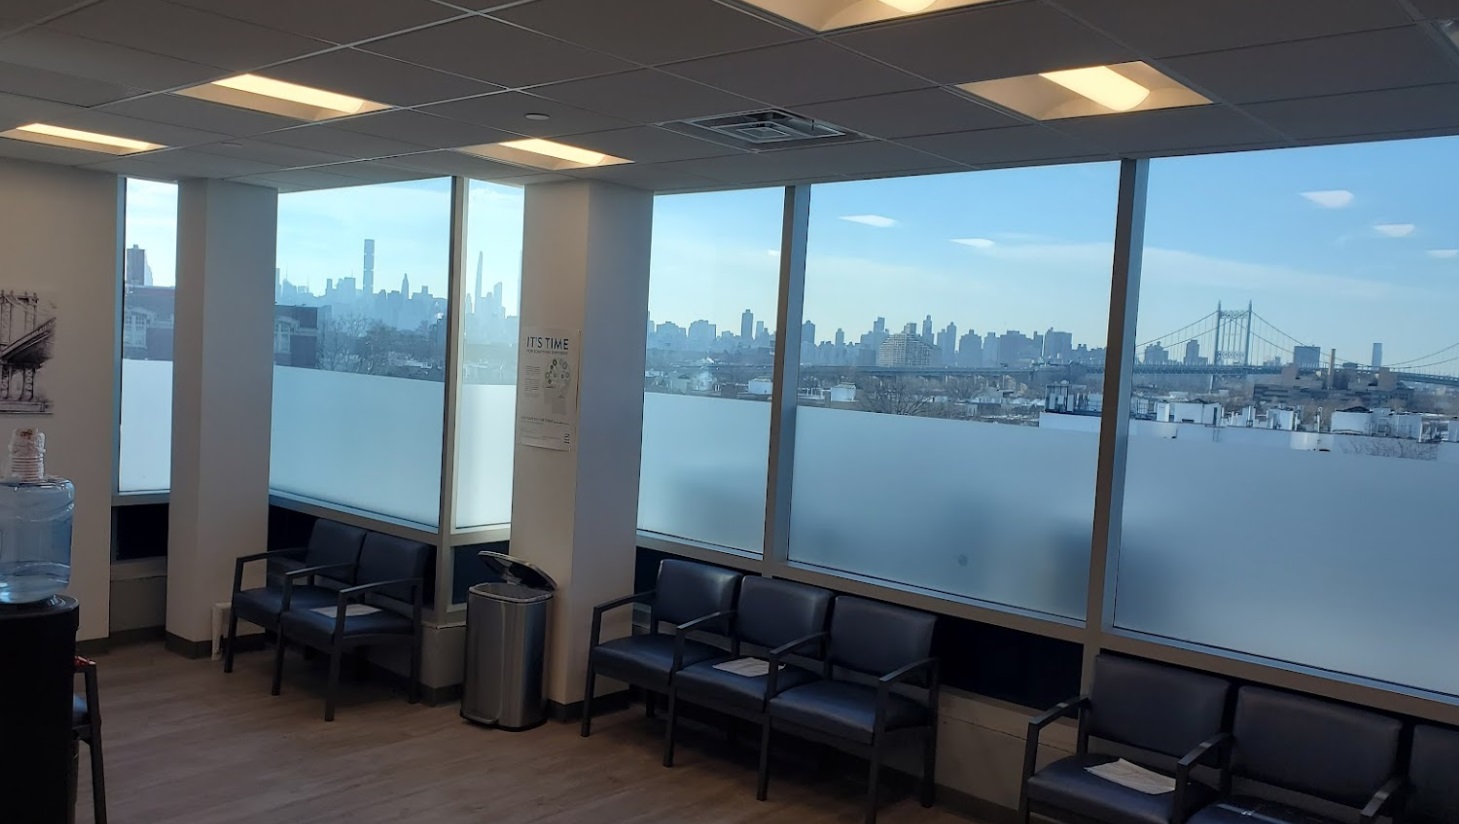 Photos of Our Business - Pain Management NYC (Astoria) - Photo (165901)